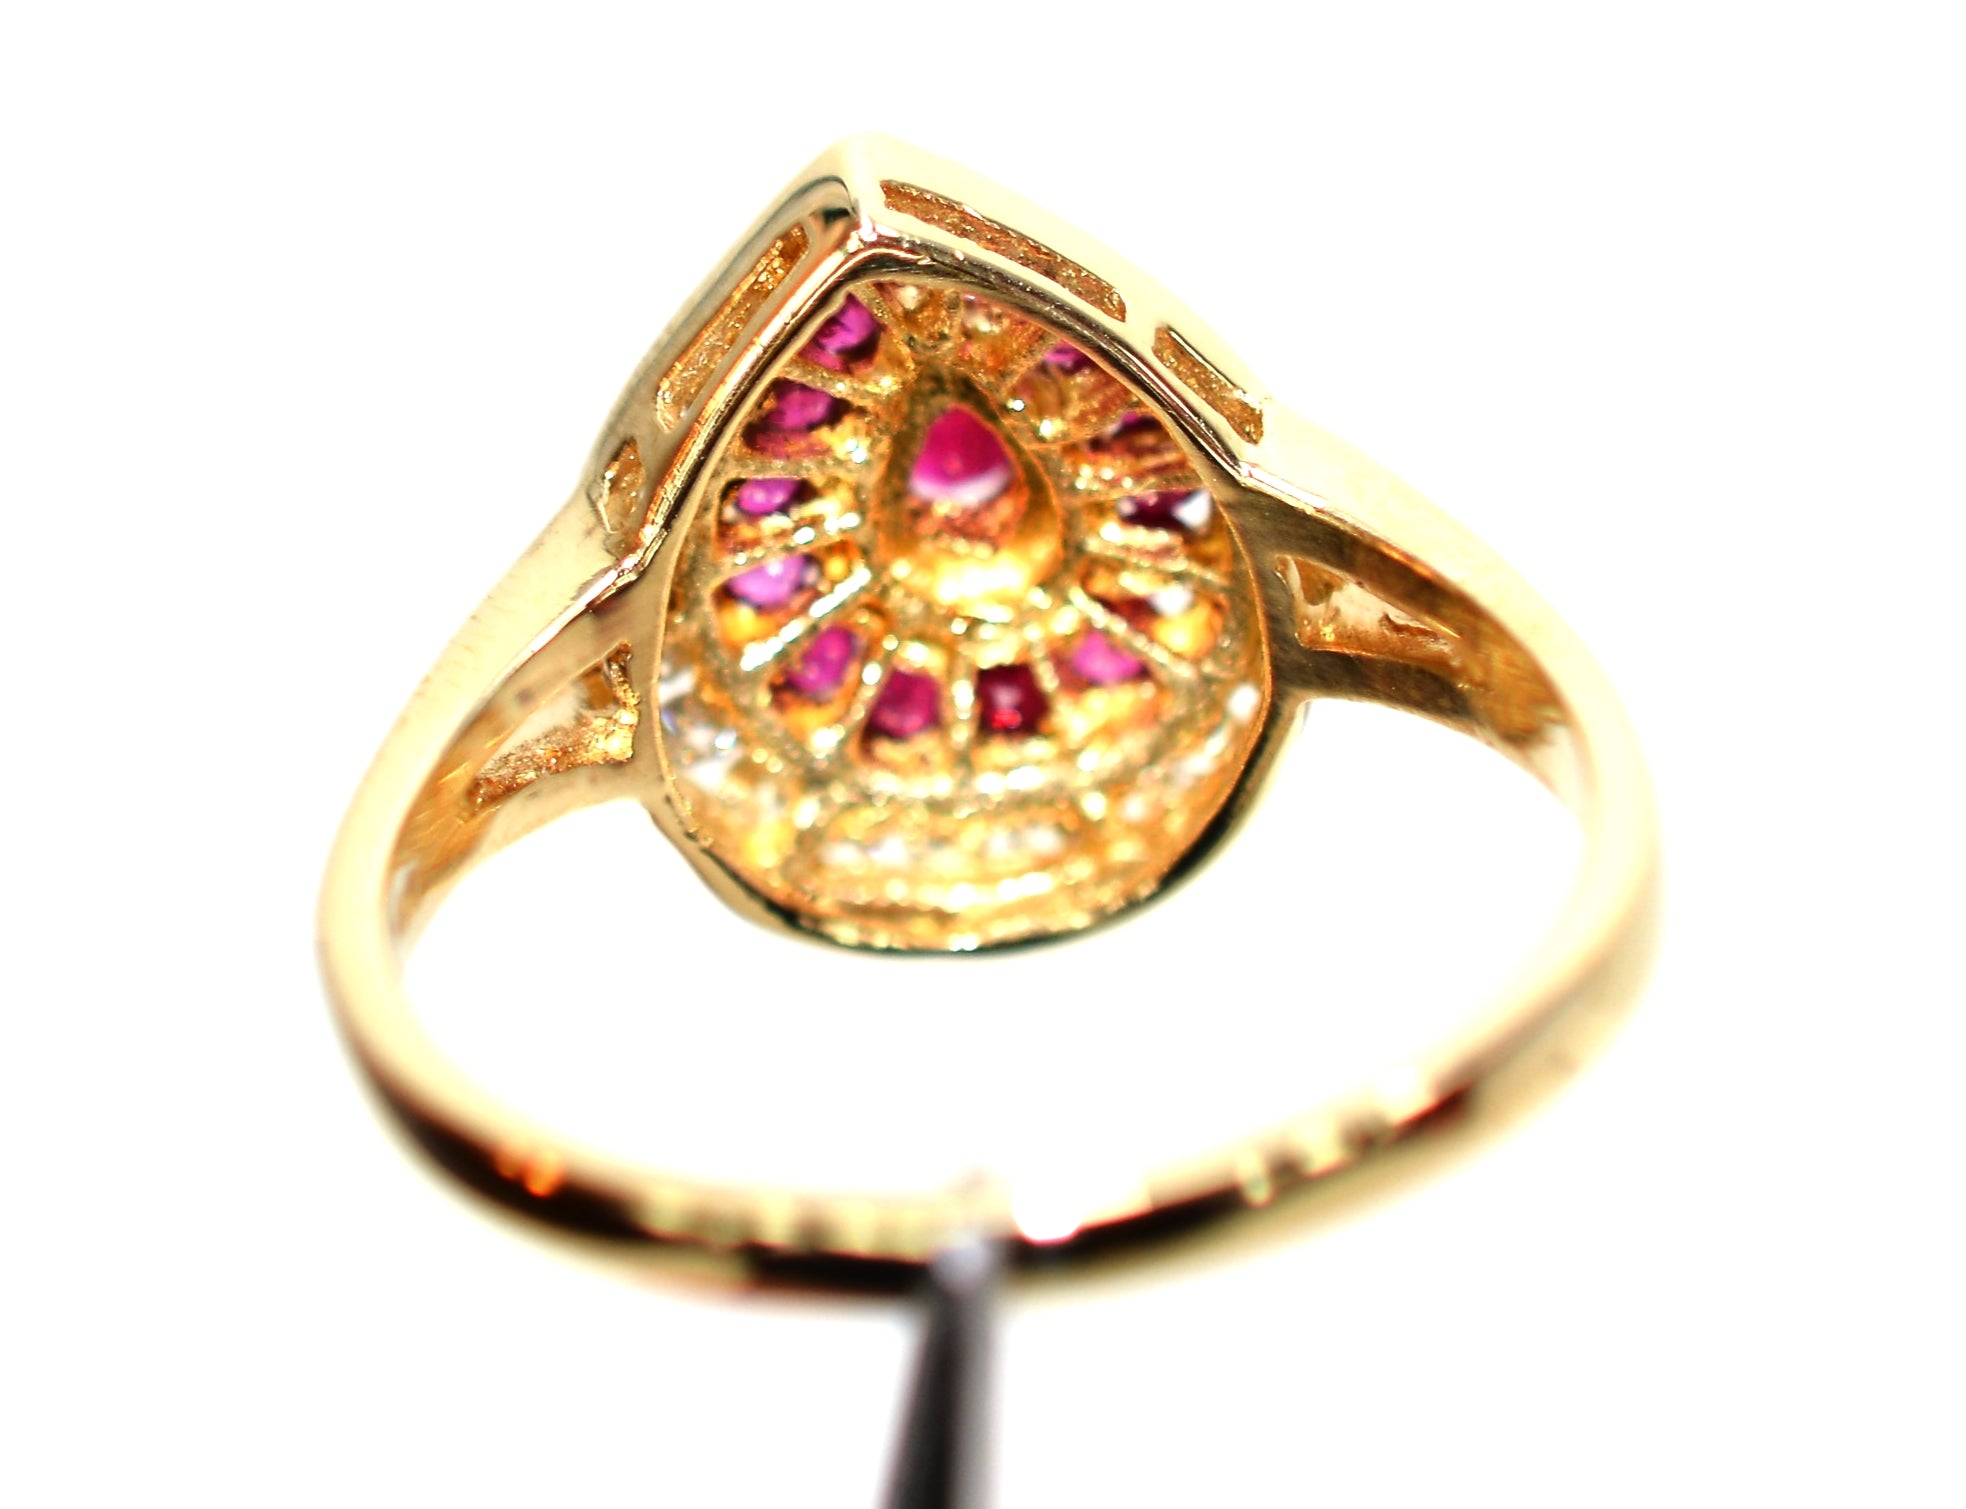 Natural Ruby & Diamond Ring 14K Solid Gold .76tcw Ruby Ring Cluster Ring Gemstone Ring Birthstone Ring Estate Jewelry Vintage Jewellery